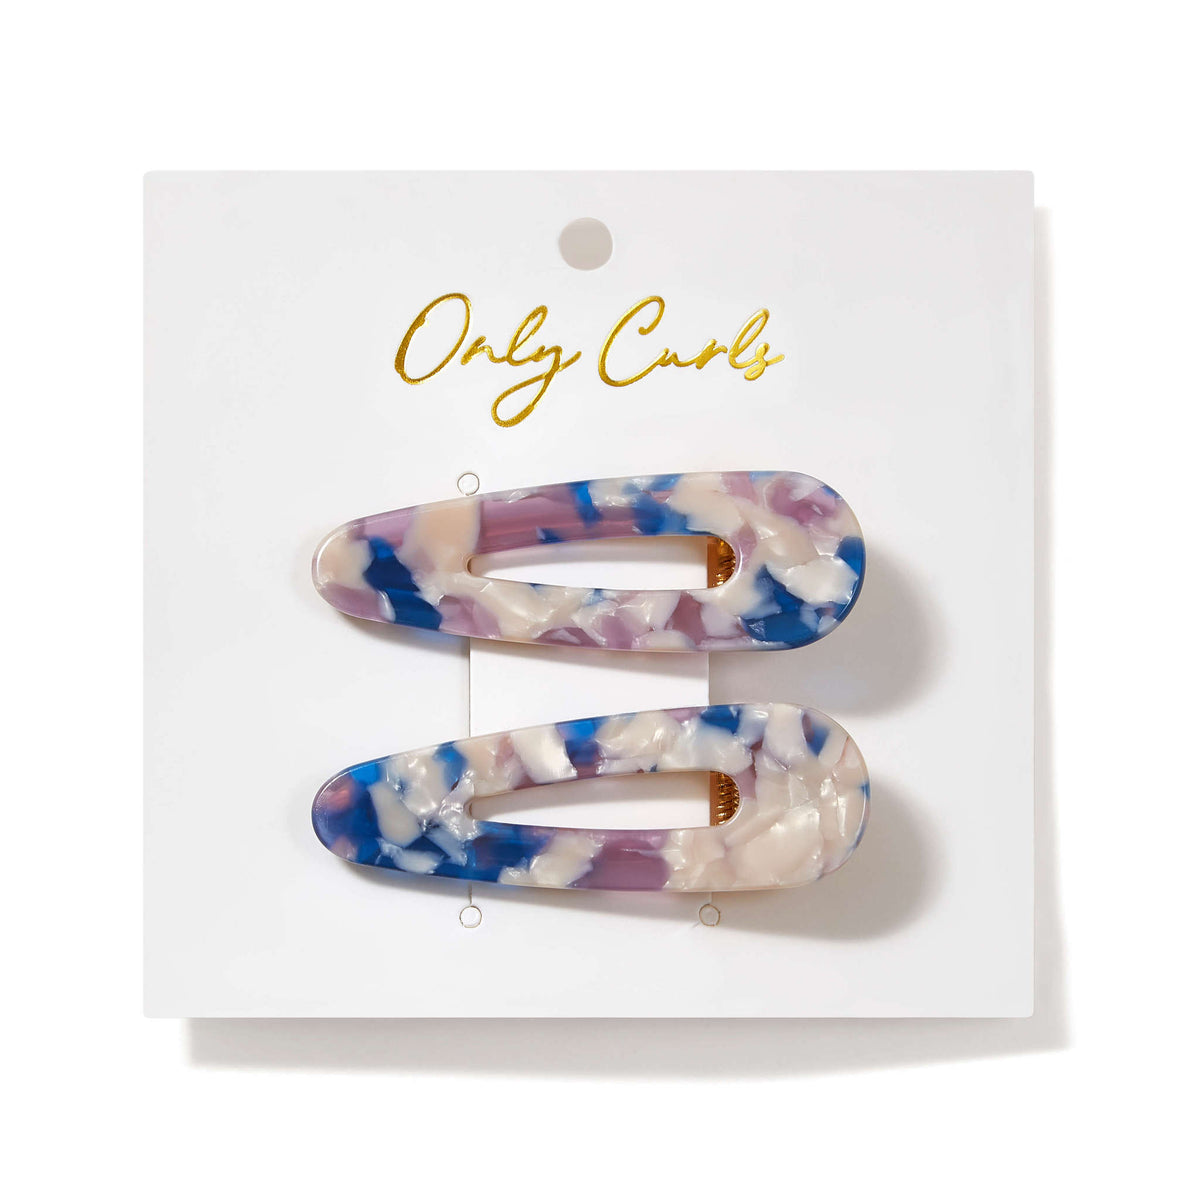 Only Curls Blue Confetti Crocodile Hair Clips - Only Curls